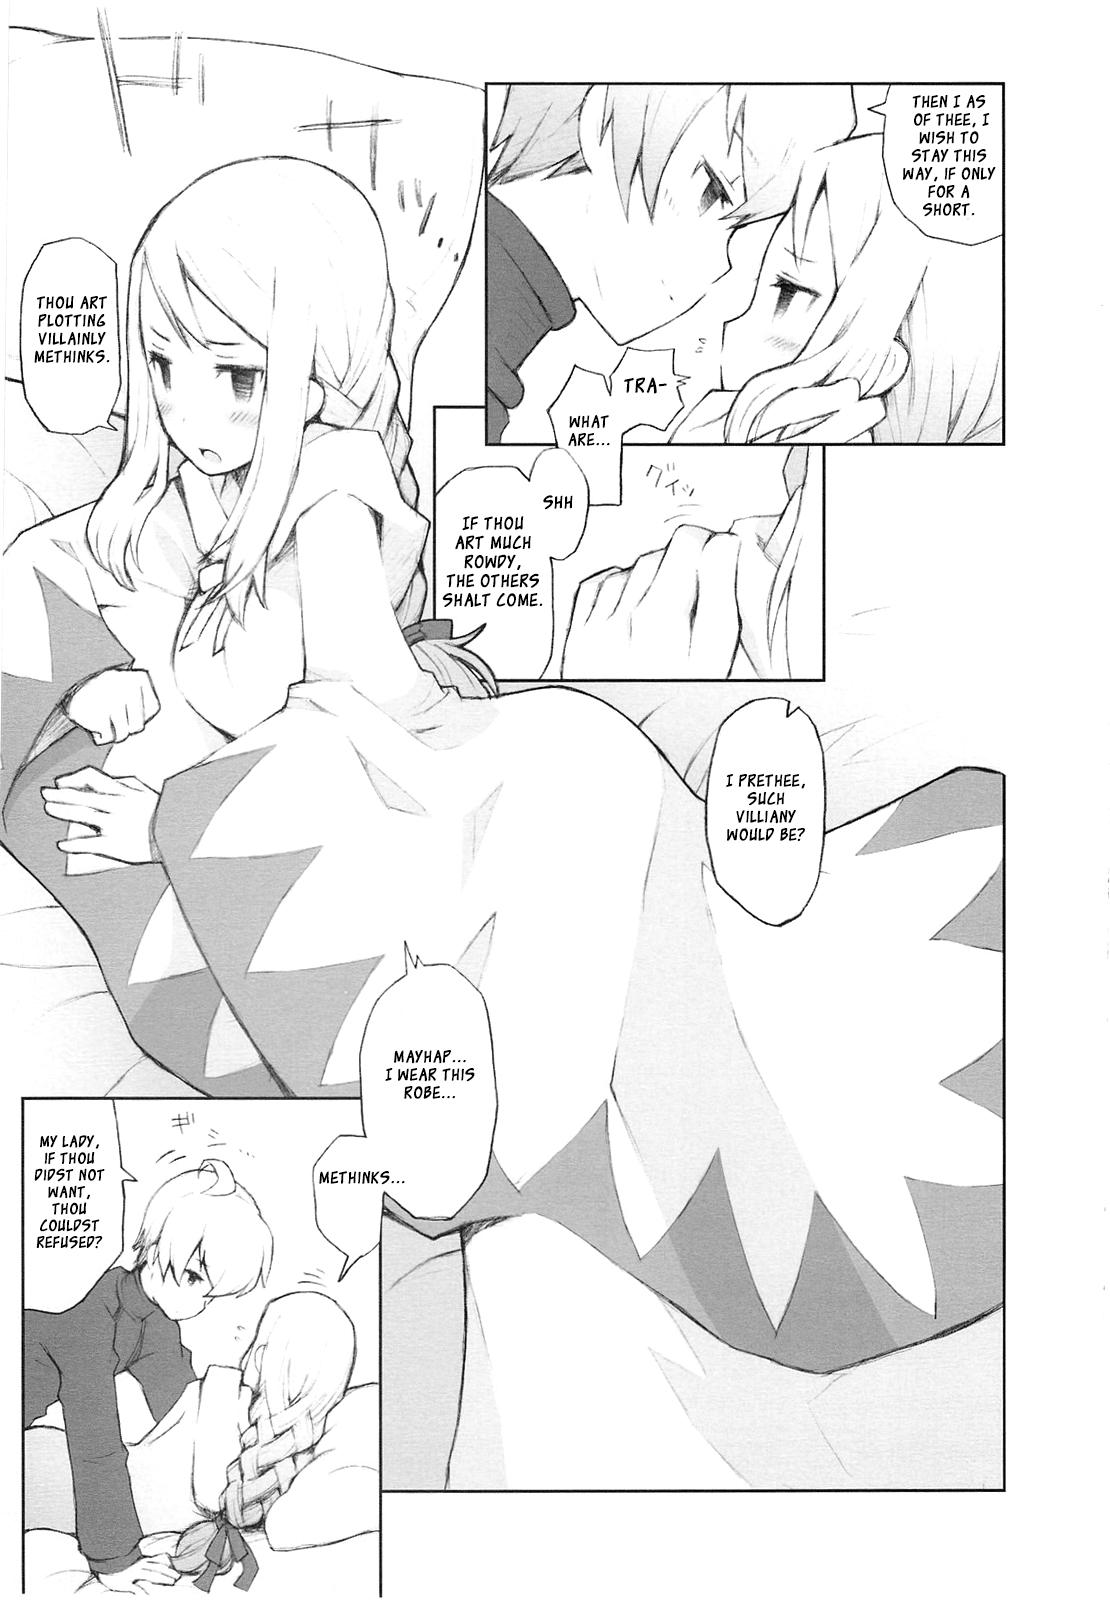 Real Orgasm Like a White - Final fantasy tactics Erotica - Page 8